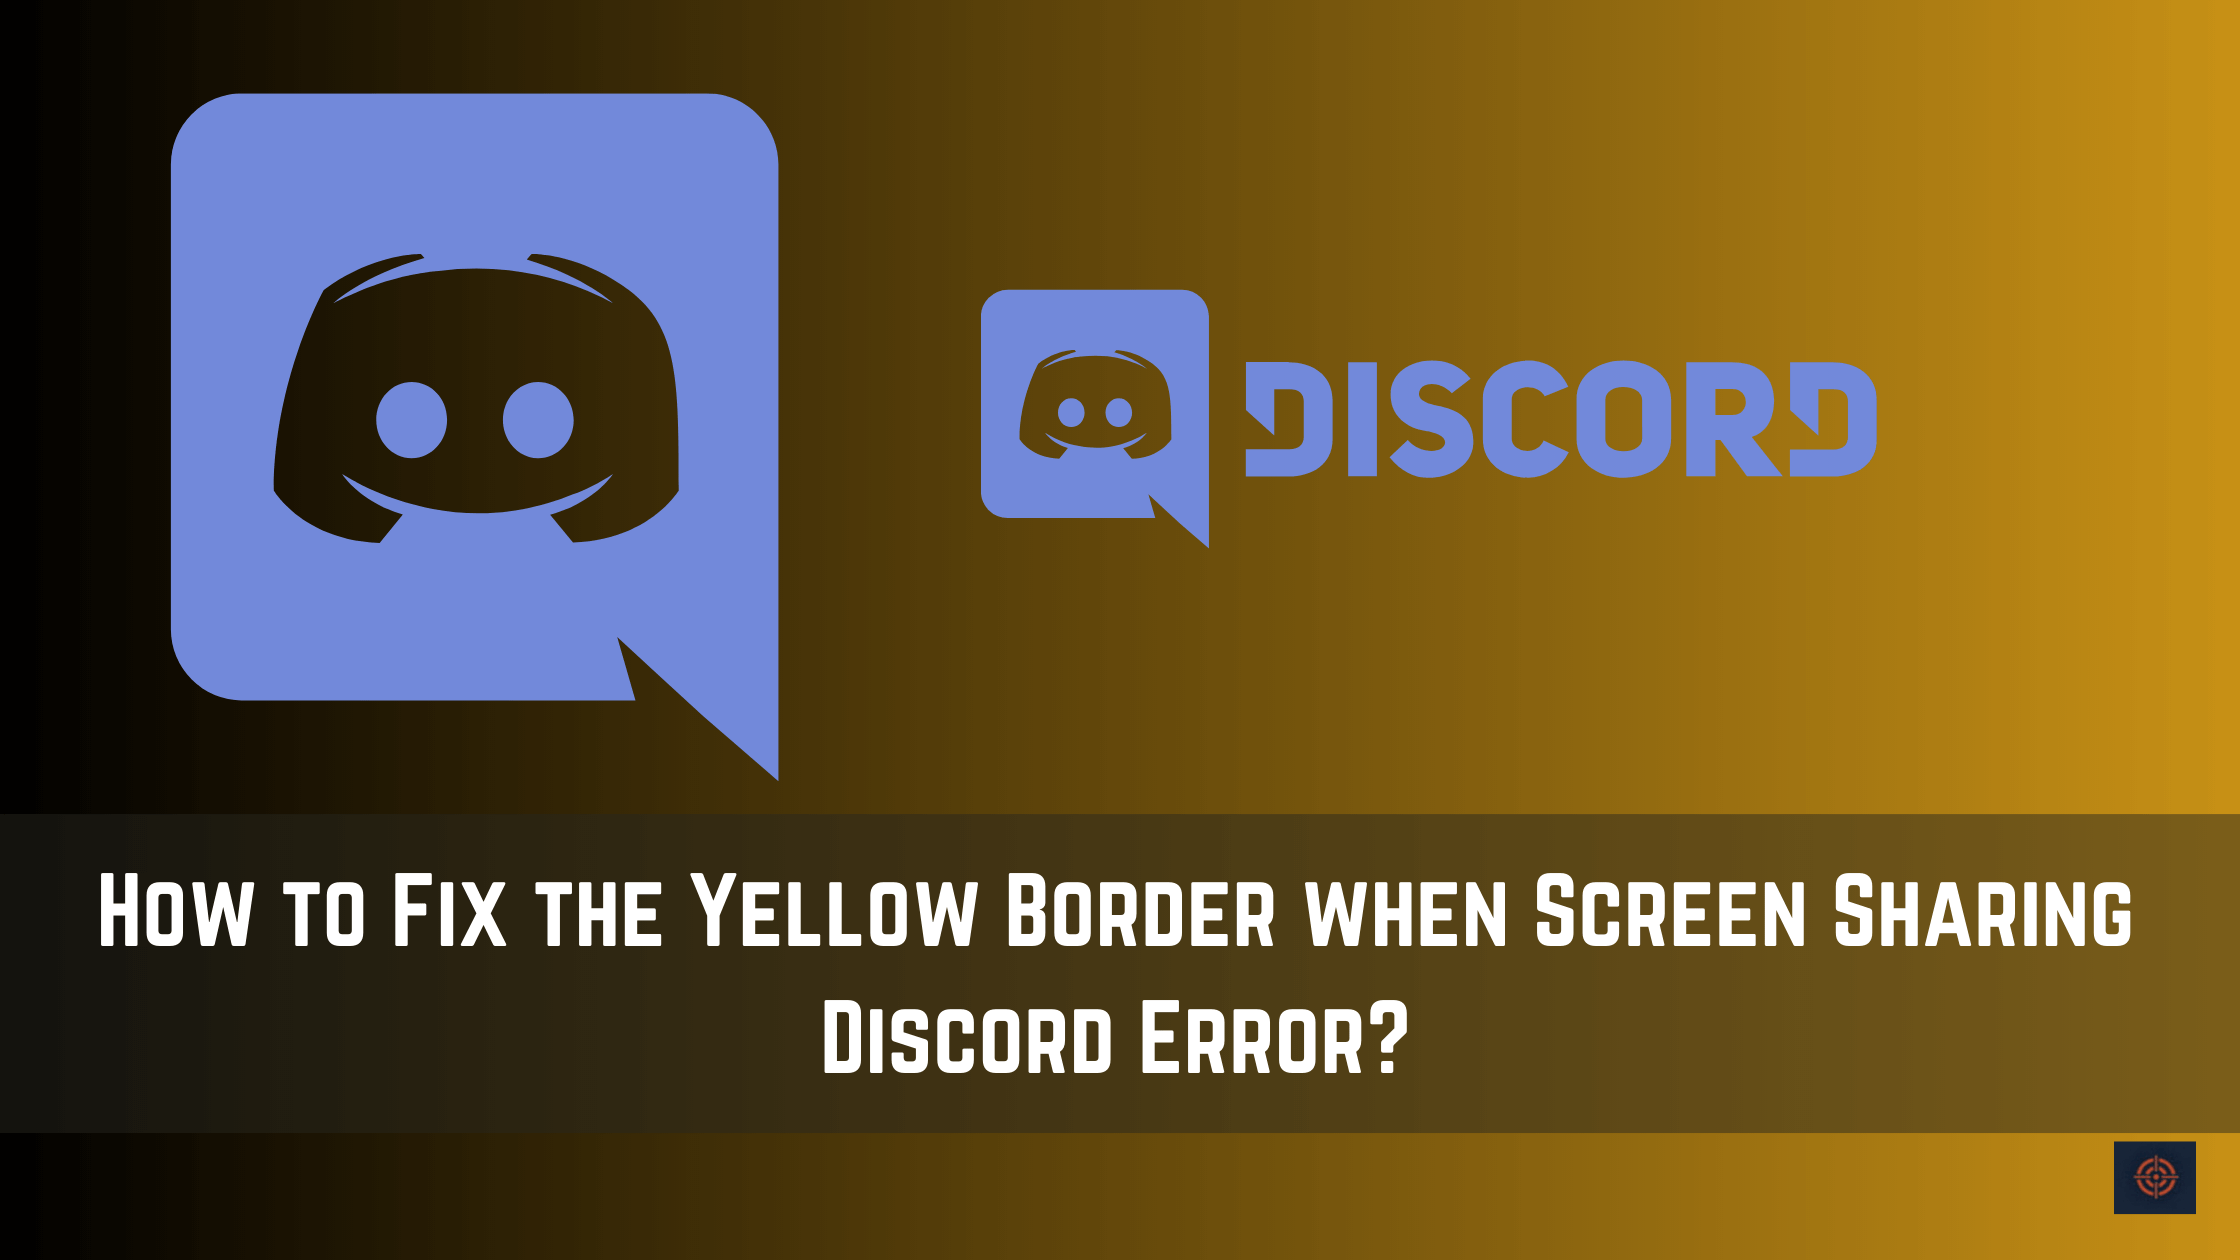 How to Fix the Yellow Border when Screen Sharing Discord Error